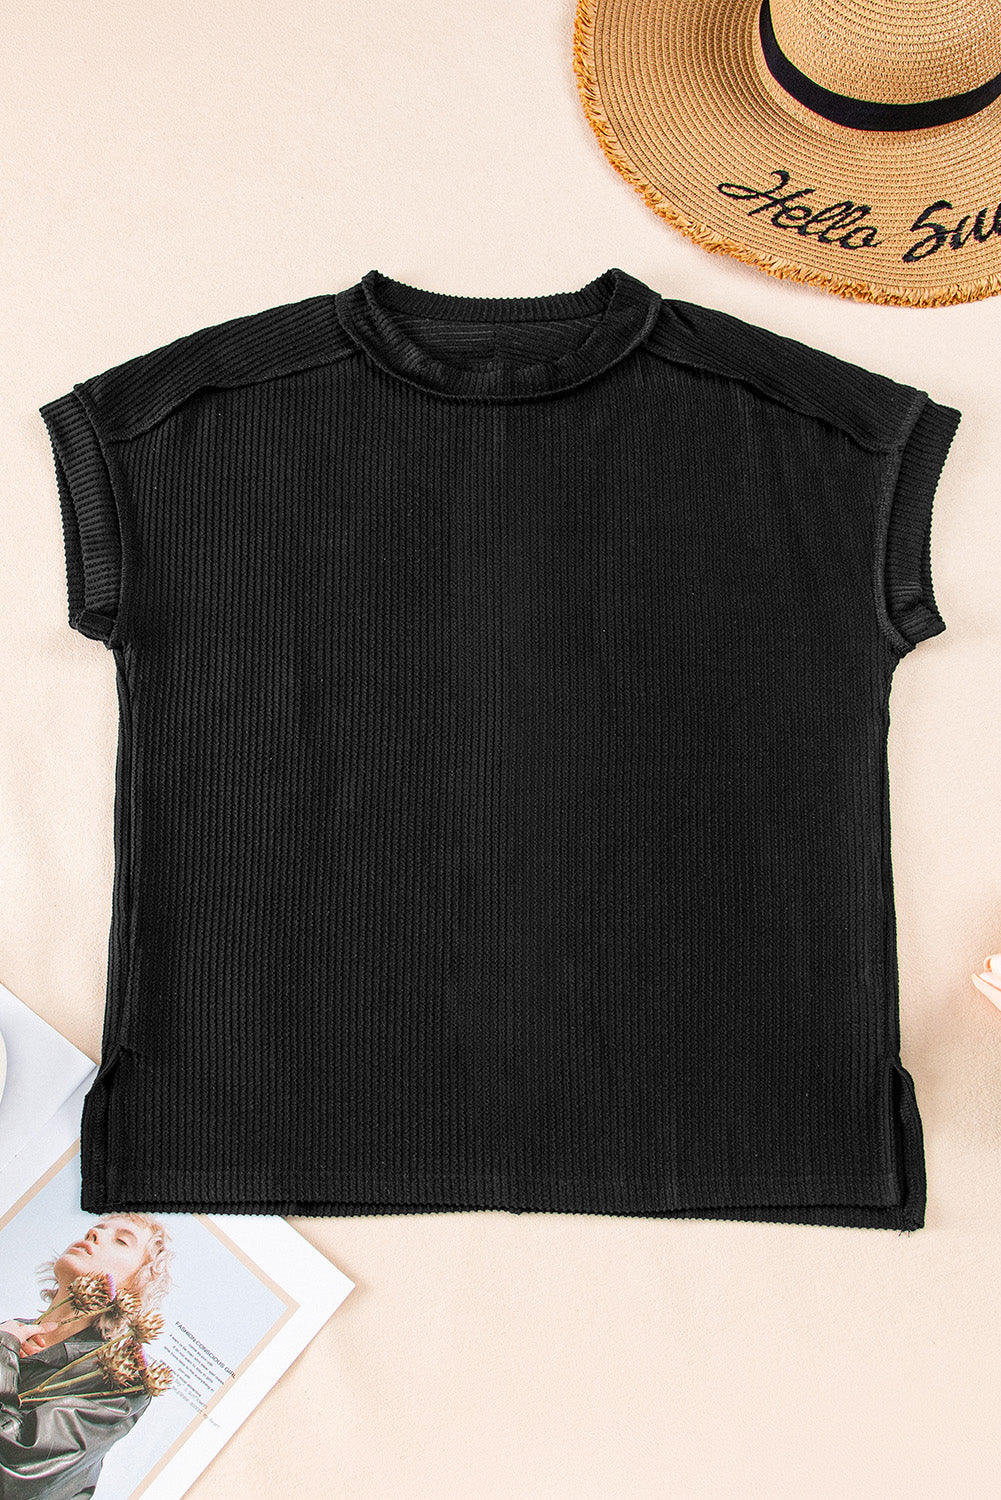 Black Textured Knit Exposed Stitching T-shirt